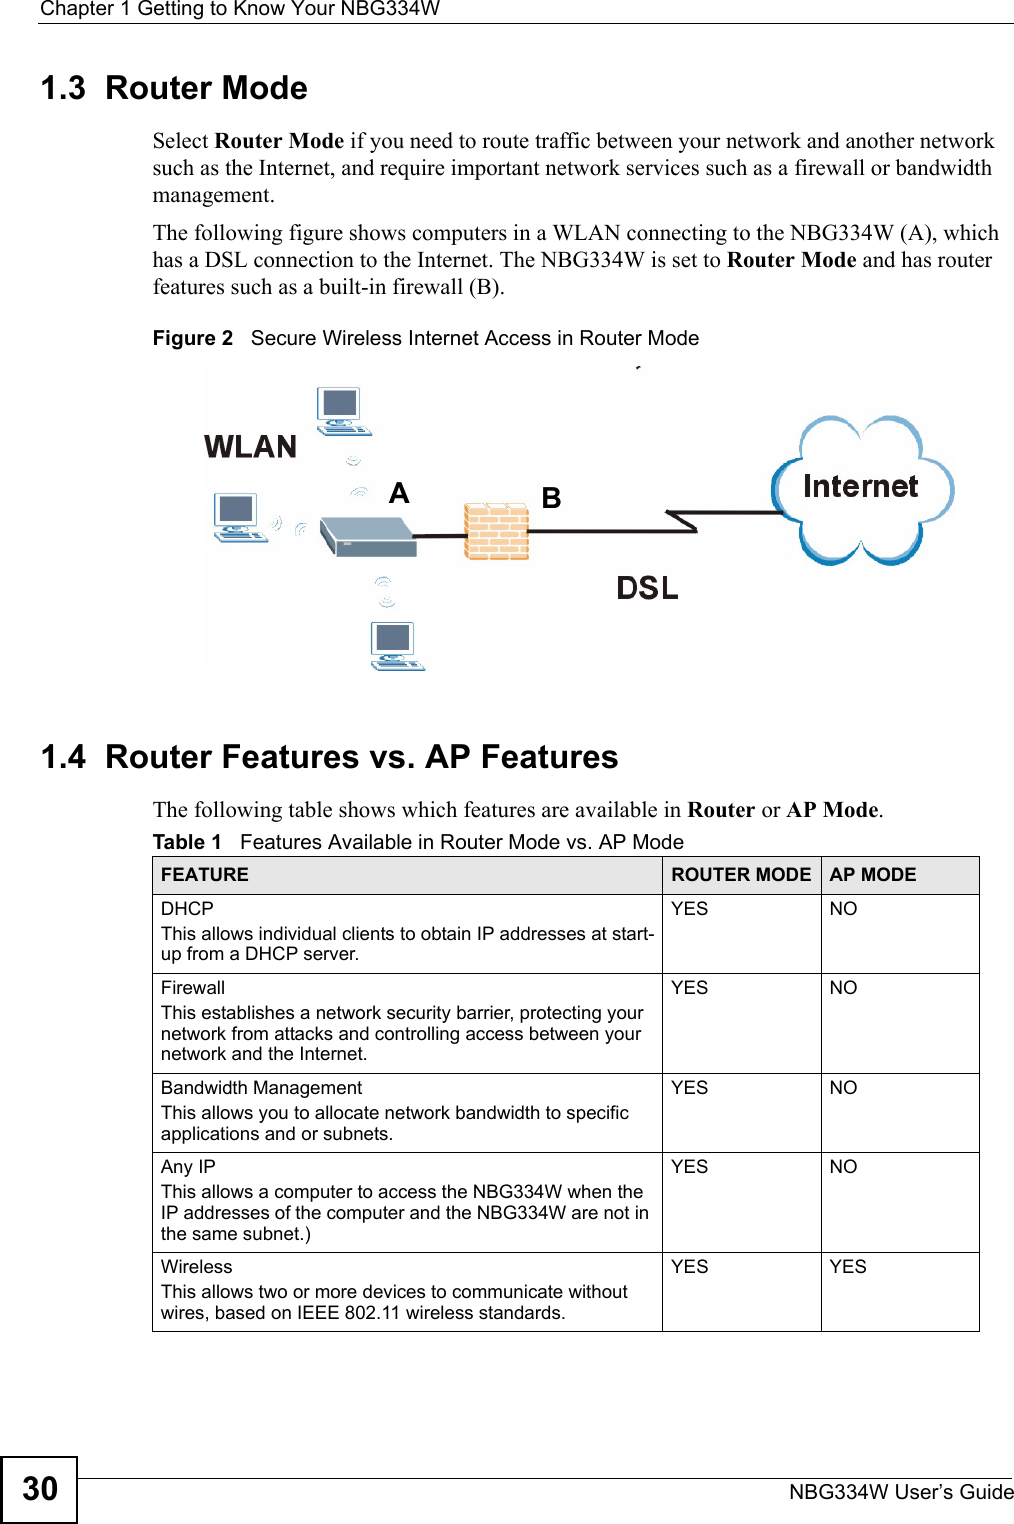 Chapter 1 Getting to Know Your NBG334WNBG334W User’s Guide301.3  Router ModeSelect Router Mode if you need to route traffic between your network and another network such as the Internet, and require important network services such as a firewall or bandwidth management. The following figure shows computers in a WLAN connecting to the NBG334W (A), which has a DSL connection to the Internet. The NBG334W is set to Router Mode and has router features such as a built-in firewall (B).Figure 2   Secure Wireless Internet Access in Router Mode 1.4  Router Features vs. AP FeaturesThe following table shows which features are available in Router or AP Mode.ABTable 1   Features Available in Router Mode vs. AP ModeFEATURE ROUTER MODE AP MODEDHCPThis allows individual clients to obtain IP addresses at start-up from a DHCP server.YES NOFirewallThis establishes a network security barrier, protecting your network from attacks and controlling access between your network and the Internet.YES NOBandwidth ManagementThis allows you to allocate network bandwidth to specific applications and or subnets.YES NOAny IP This allows a computer to access the NBG334W when the IP addresses of the computer and the NBG334W are not in the same subnet.)YES NOWirelessThis allows two or more devices to communicate without wires, based on IEEE 802.11 wireless standards.YES YES